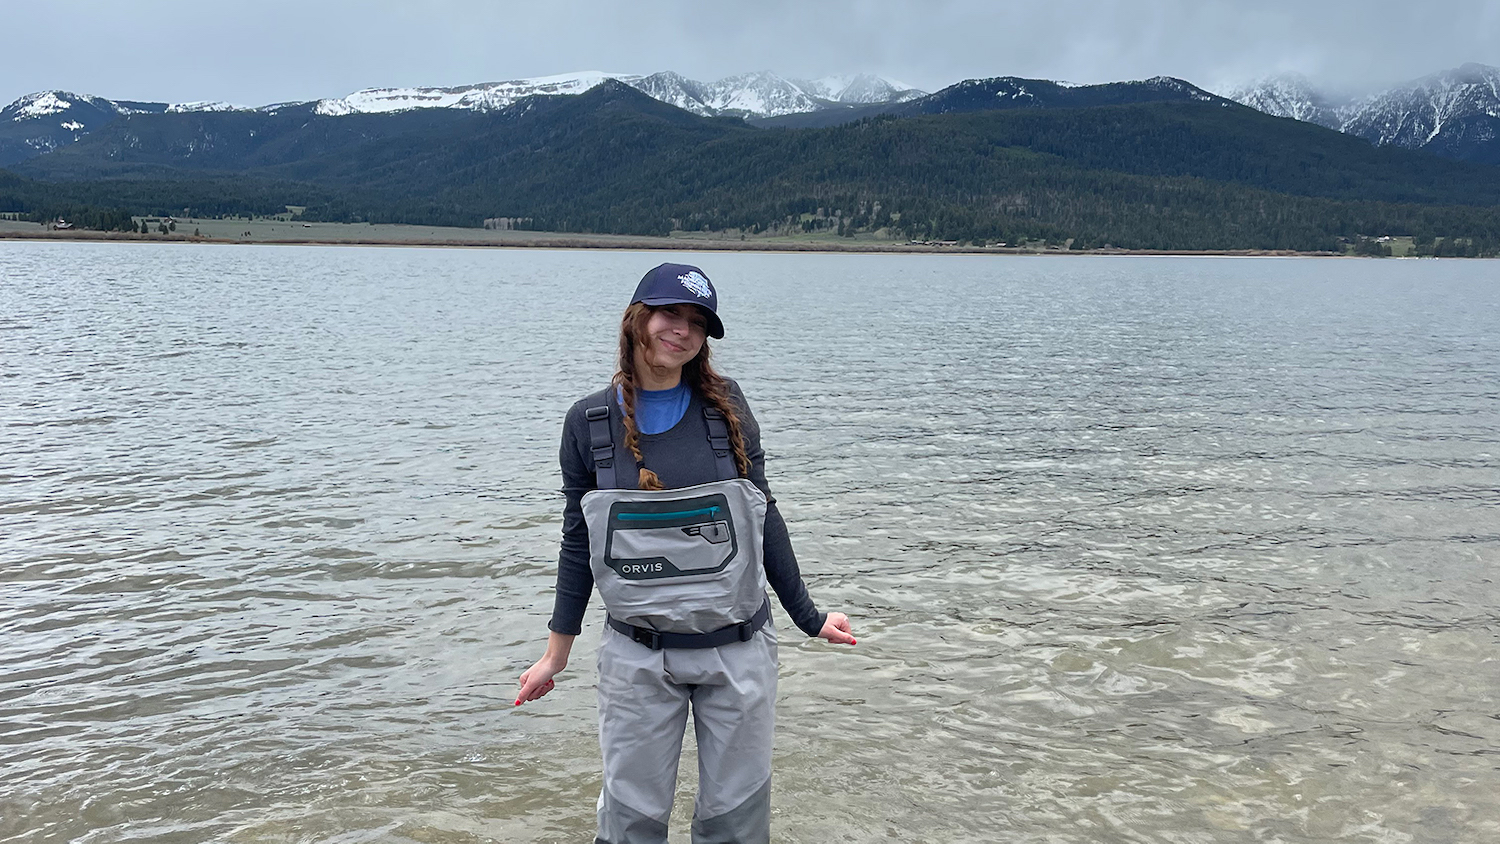 NC State student Tatiana Frontera stands in the Madison River in Montana. - Montana Conservation Corps Intern Tatiana Frontera Protects Outdoor Spaces - College of Natural Resources News NC State University